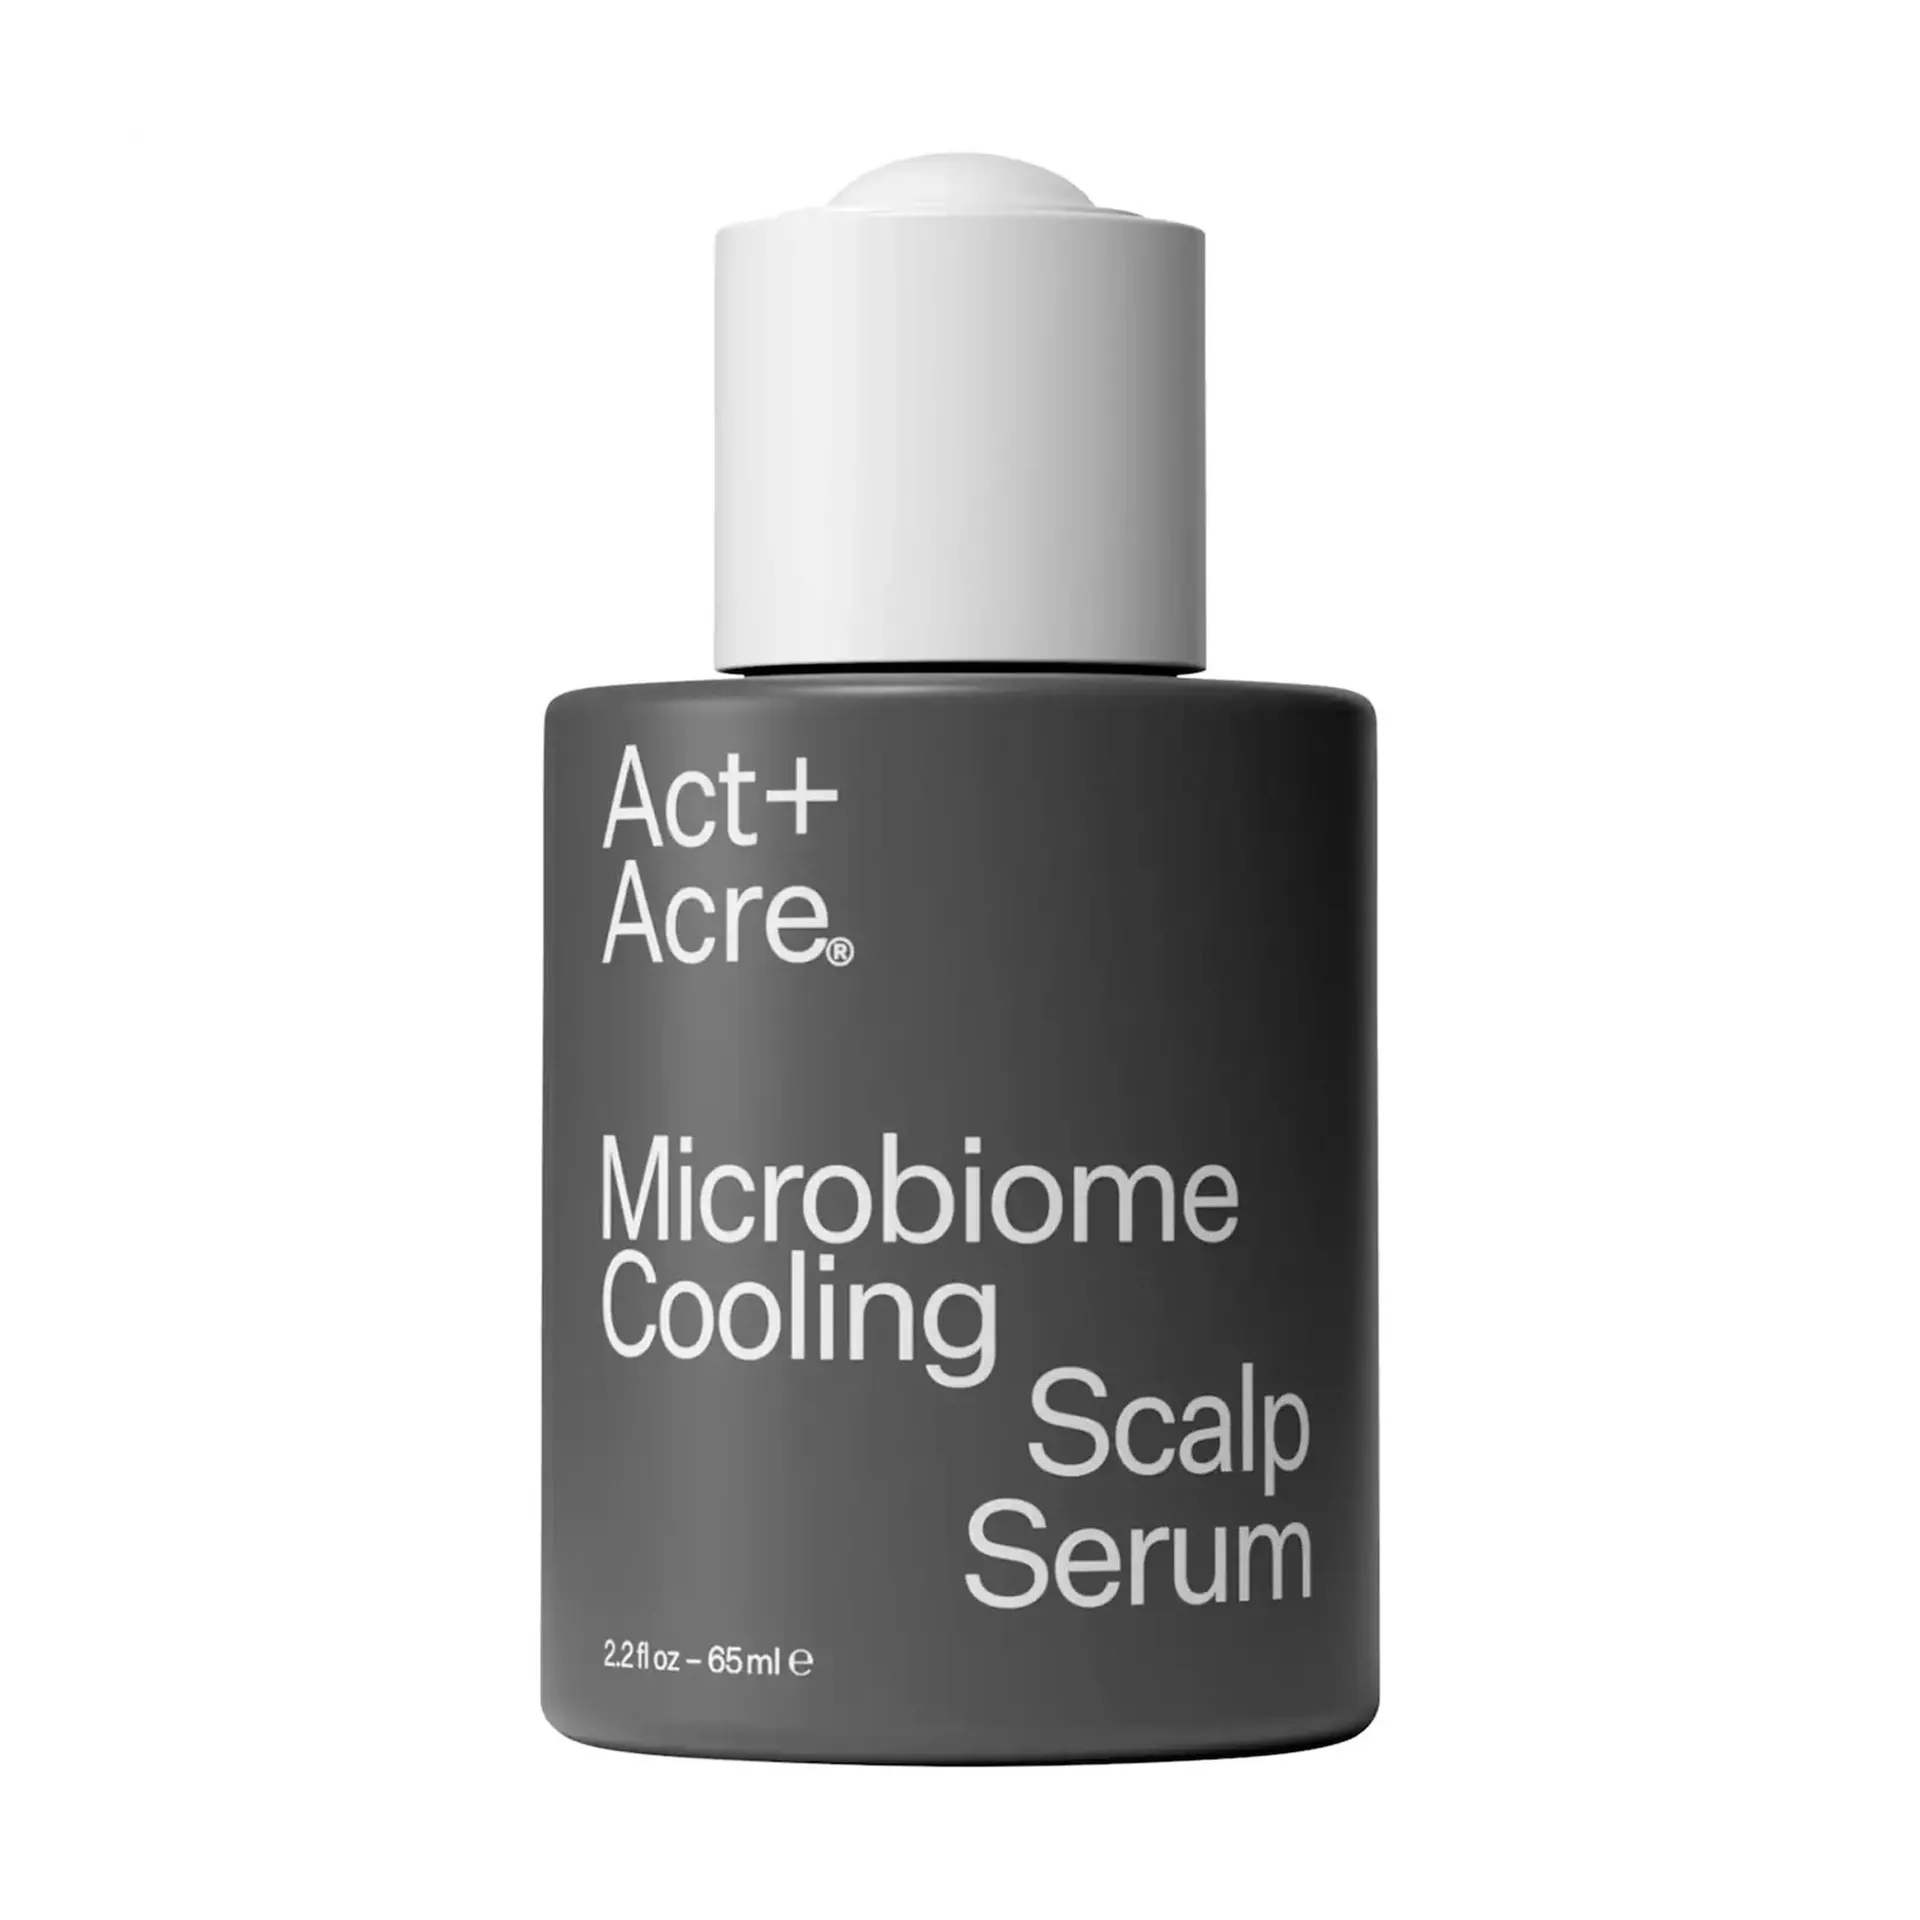 Act + Acre: Microbiome Cooling Scalp Serum